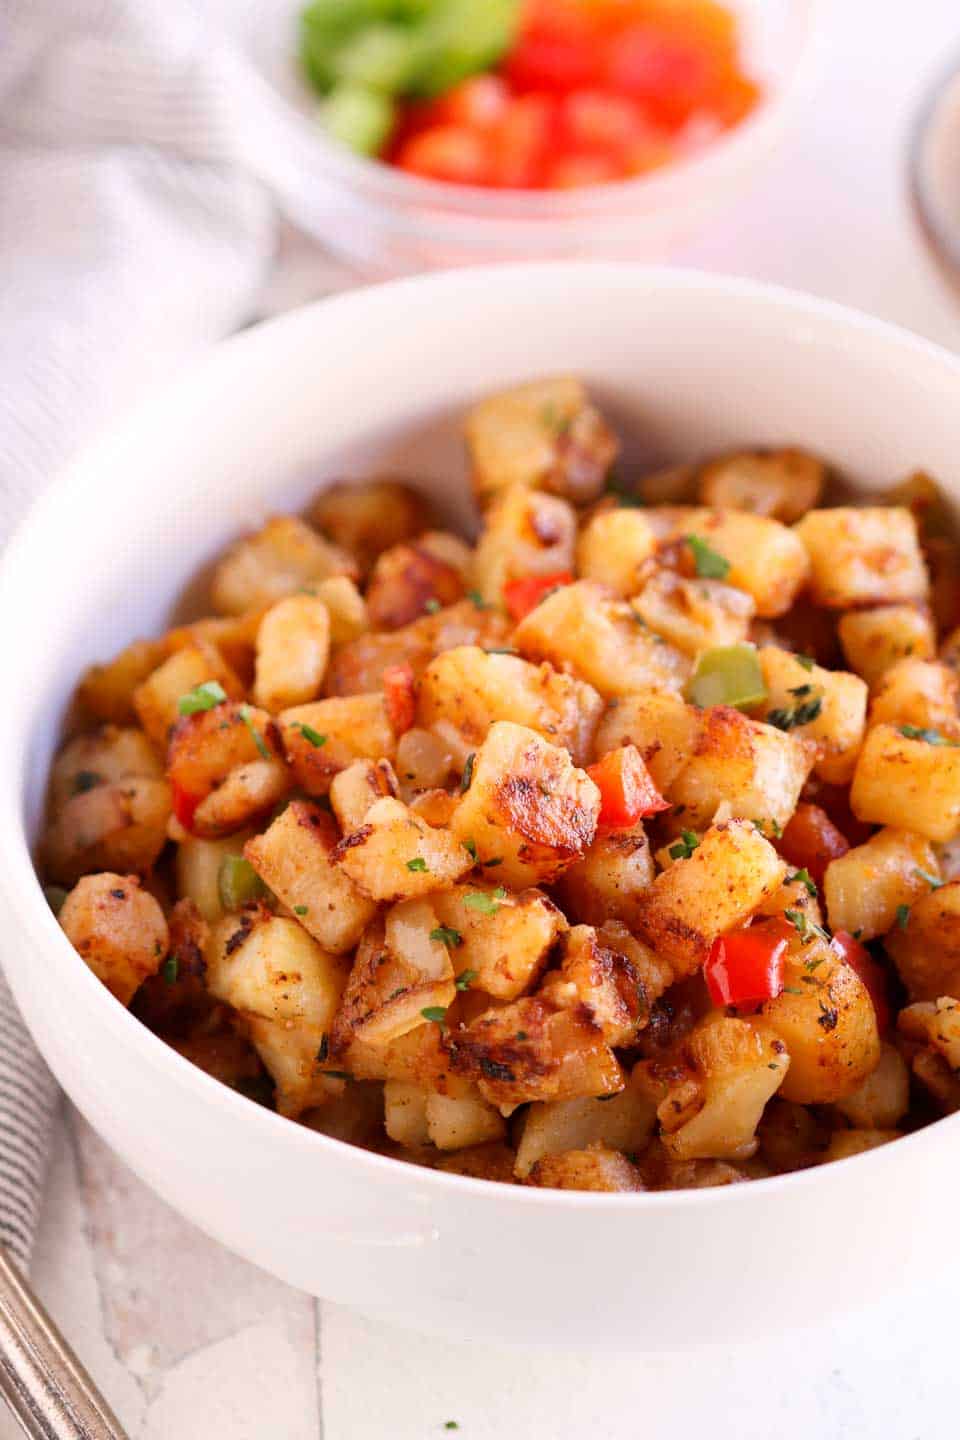 diced potatoes cooked until crispy with peppers, onions and spices and served in a white bowl